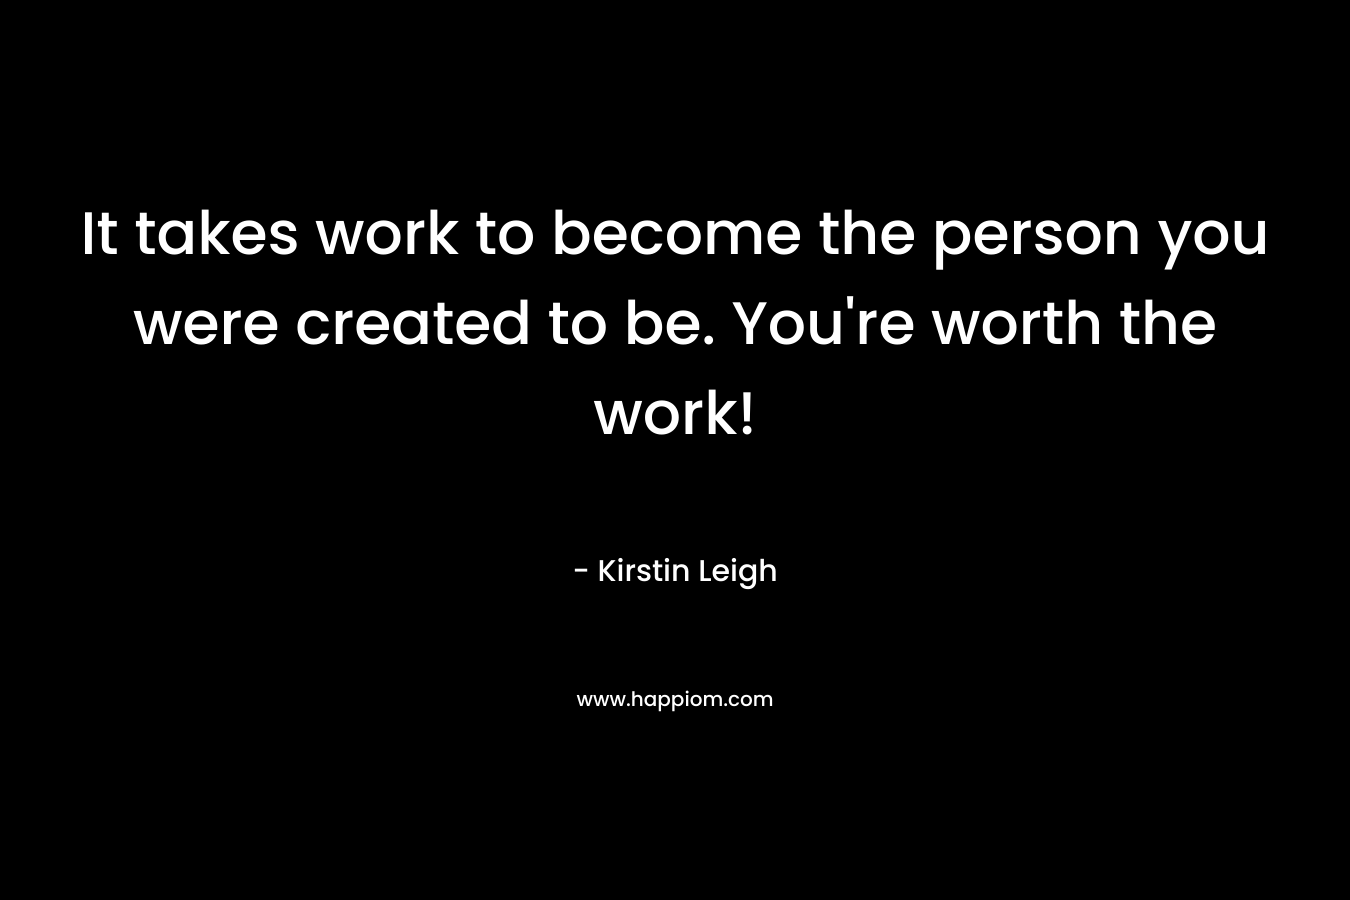 It takes work to become the person you were created to be. You’re worth the work! – Kirstin Leigh